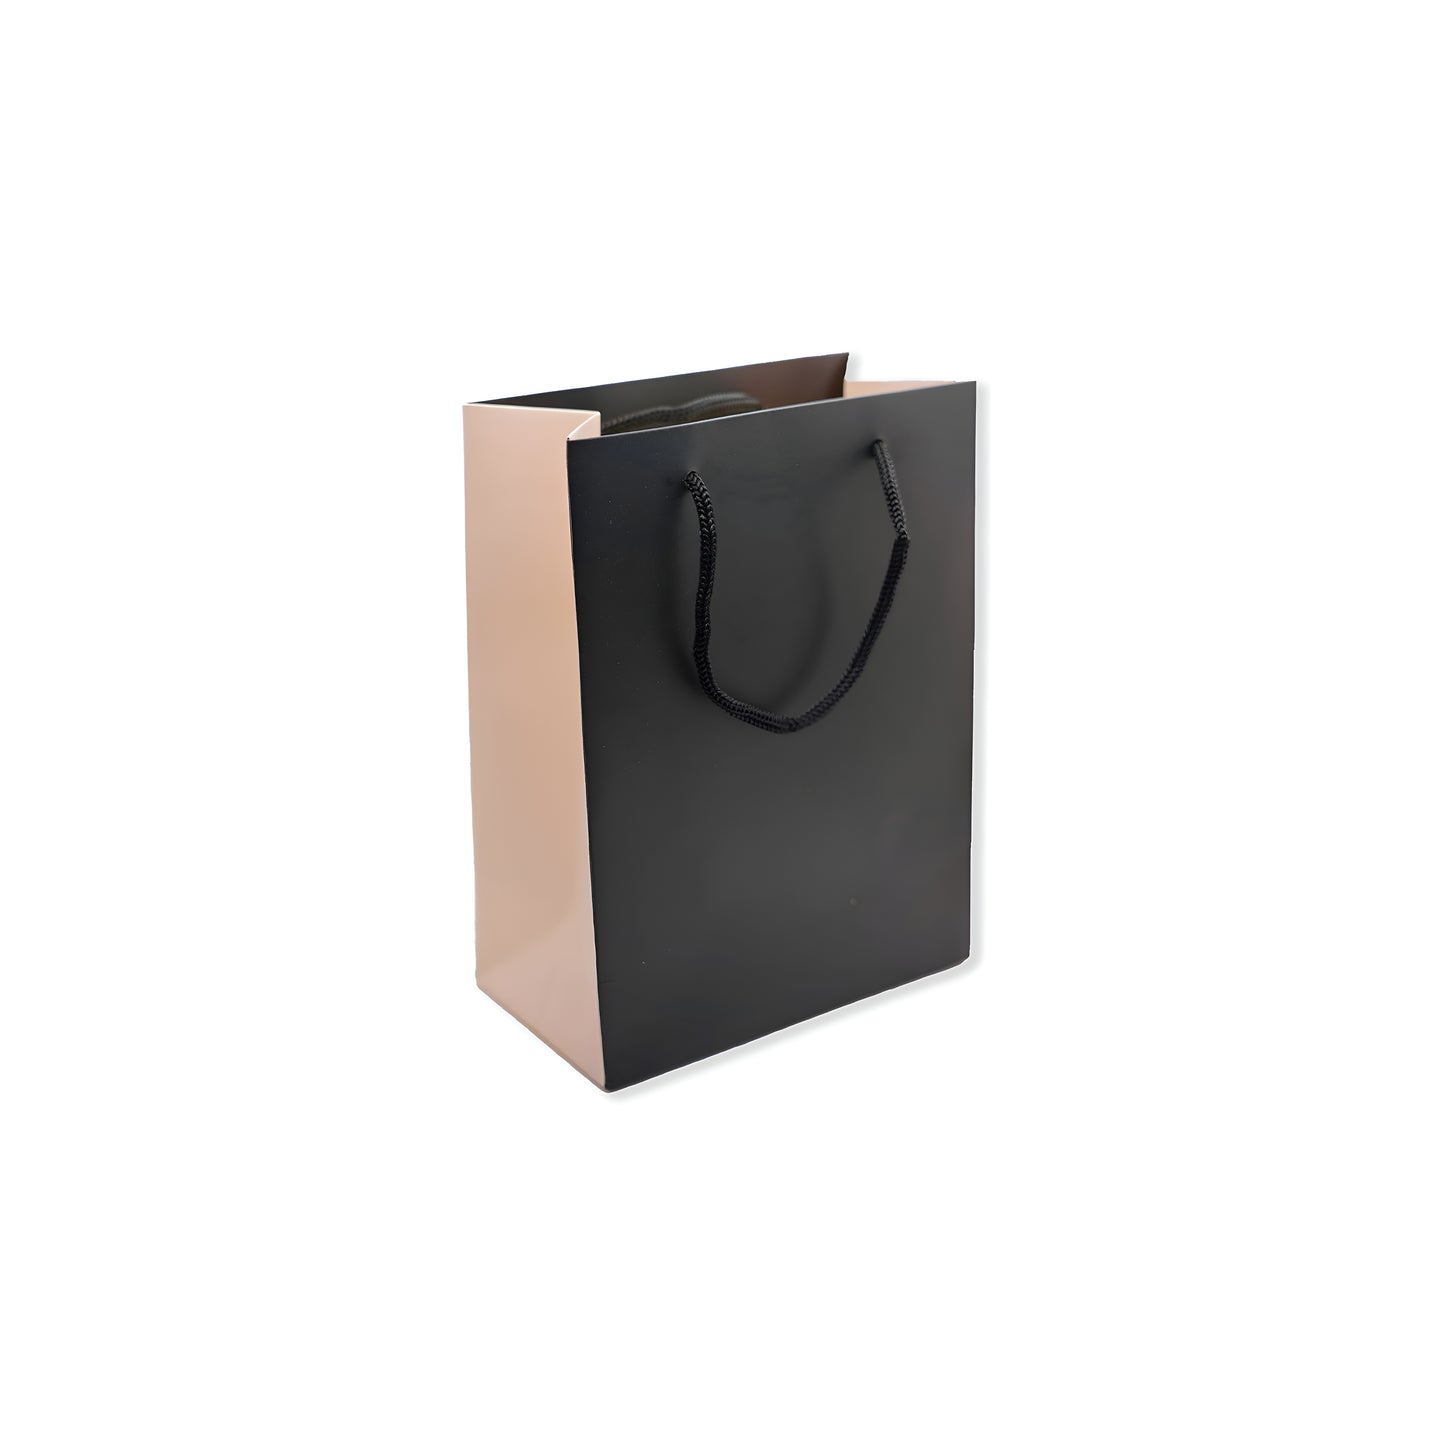 St Tropez Tote Bags (Packs of 10)